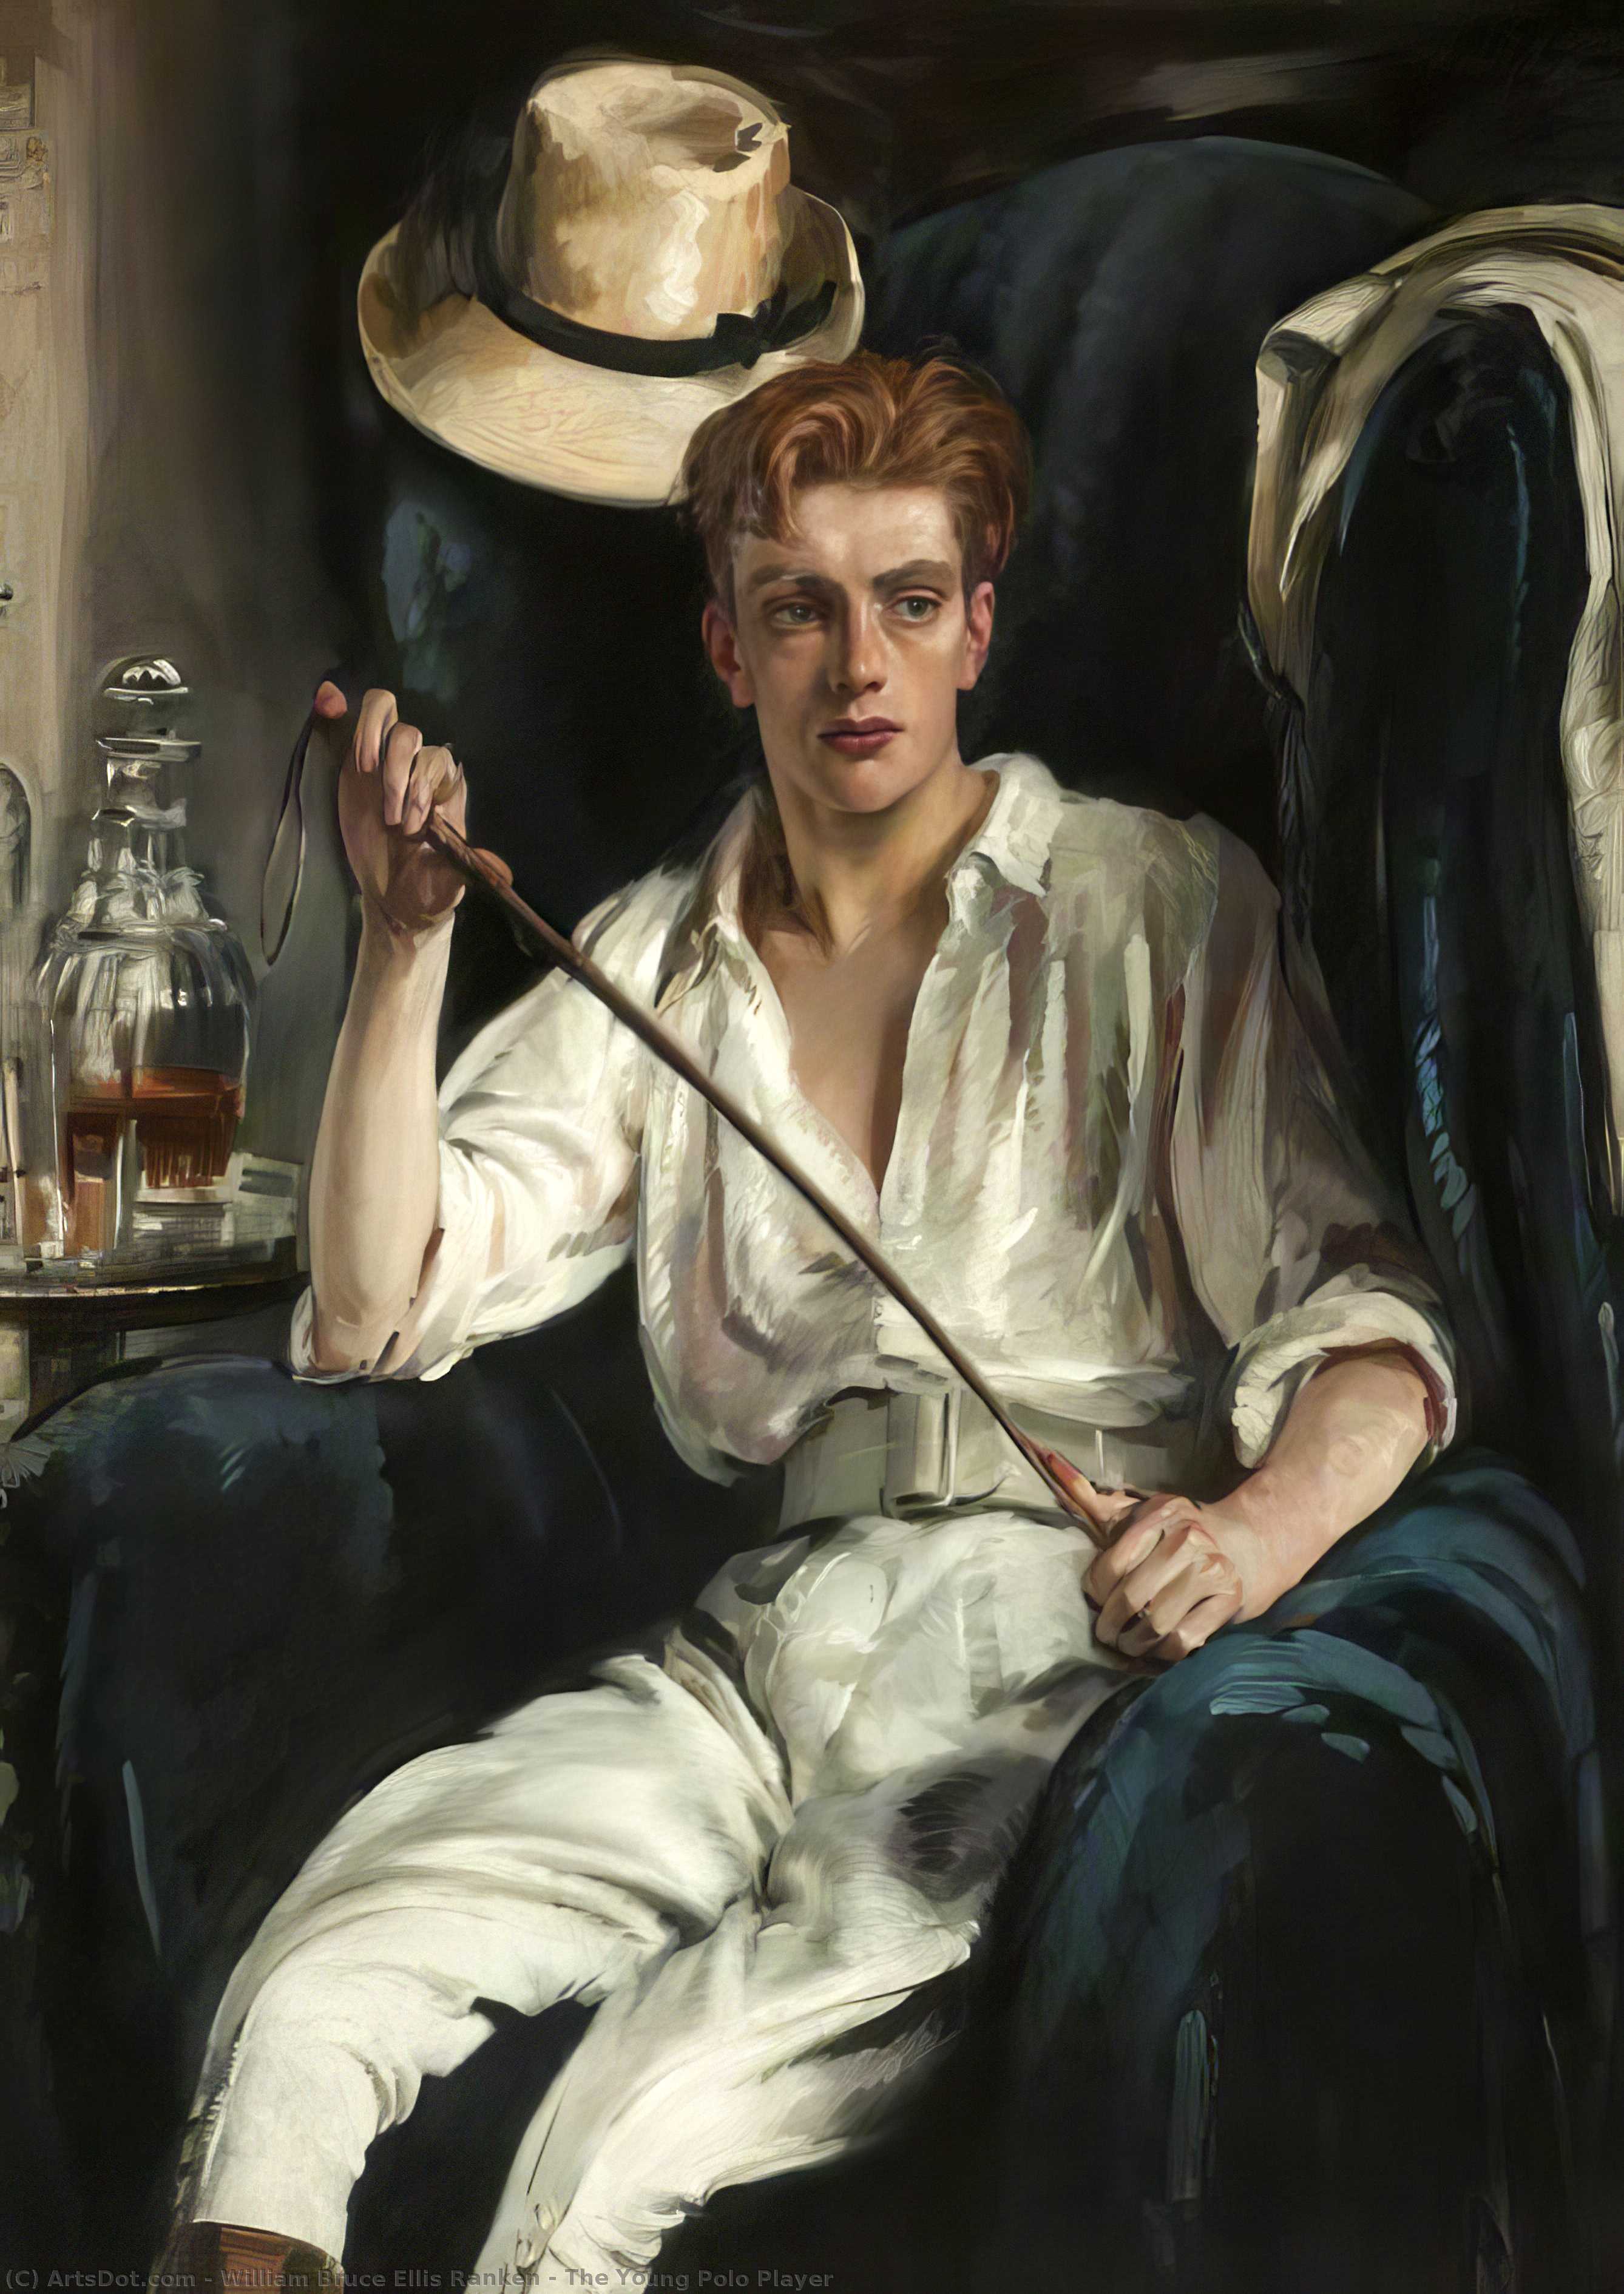 WikiOO.org - 백과 사전 - 회화, 삽화 William Bruce Ellis Ranken - The Young Polo Player